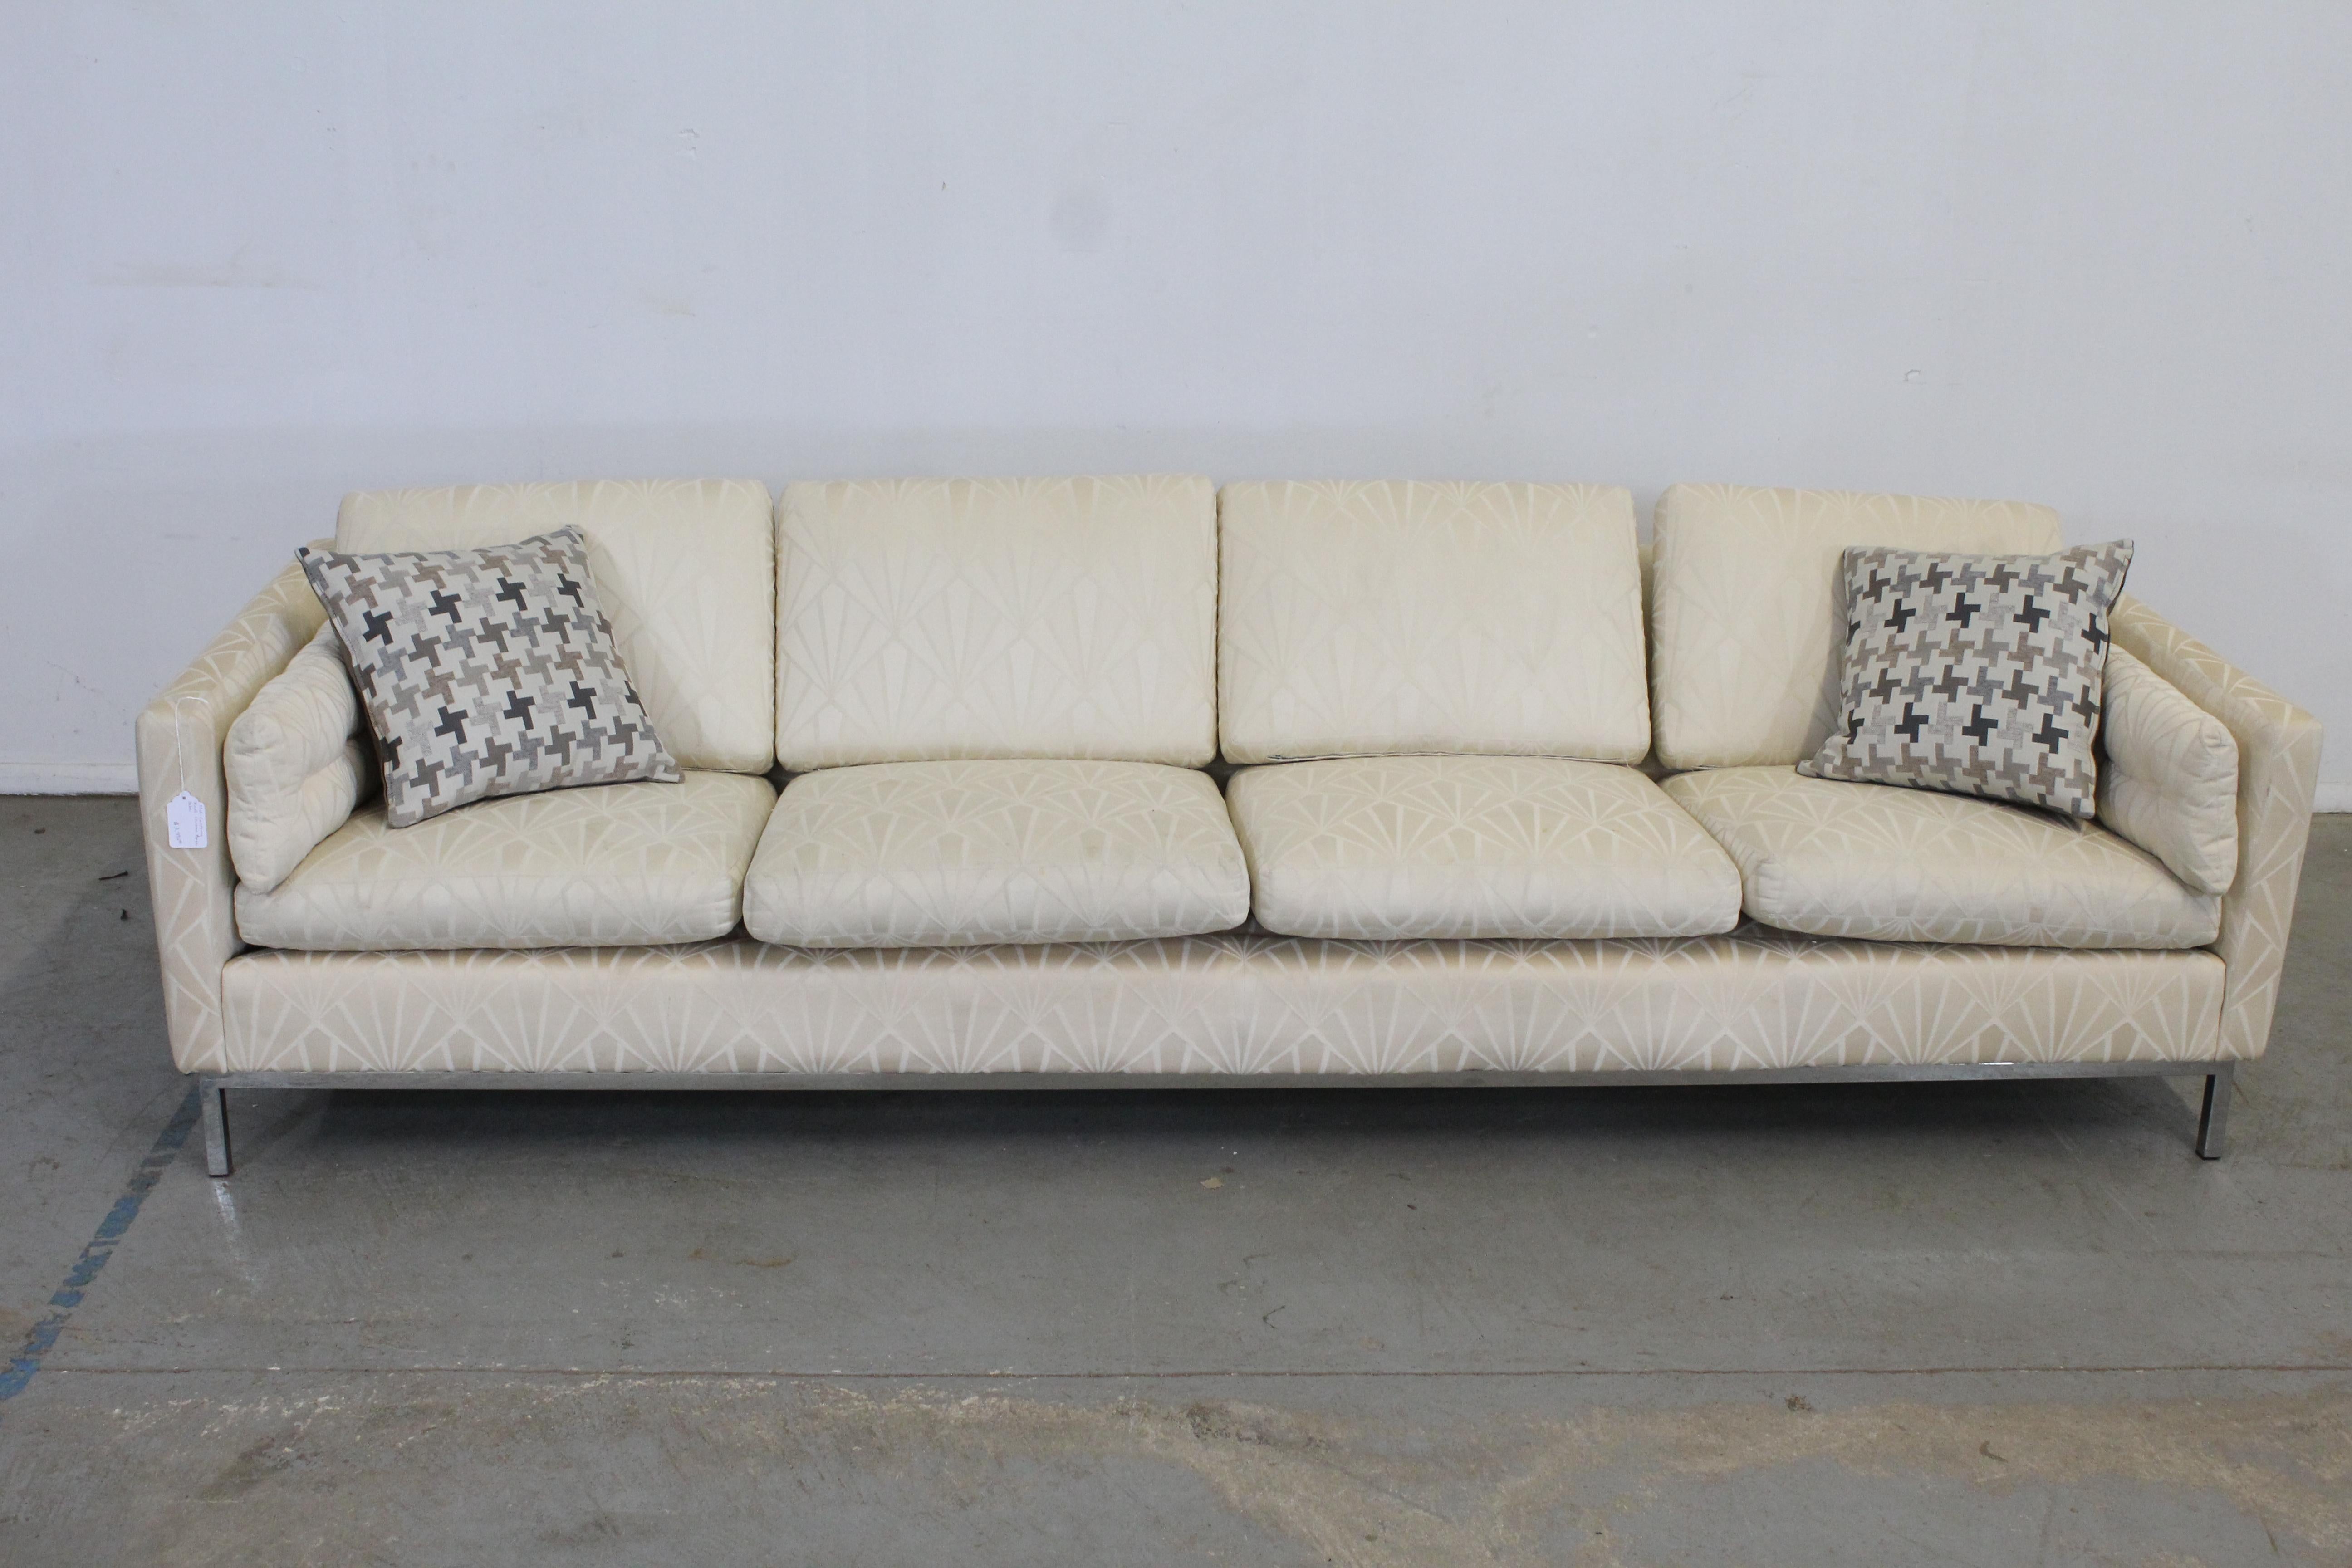 Offered is a vintage Mid-Century Modern sofa with textured upholstery and a chrome base attributed to Knoll. Has four removable seat and back cushions. It is in structurally sound condition, but needs to be reupholstered, showing stains on the